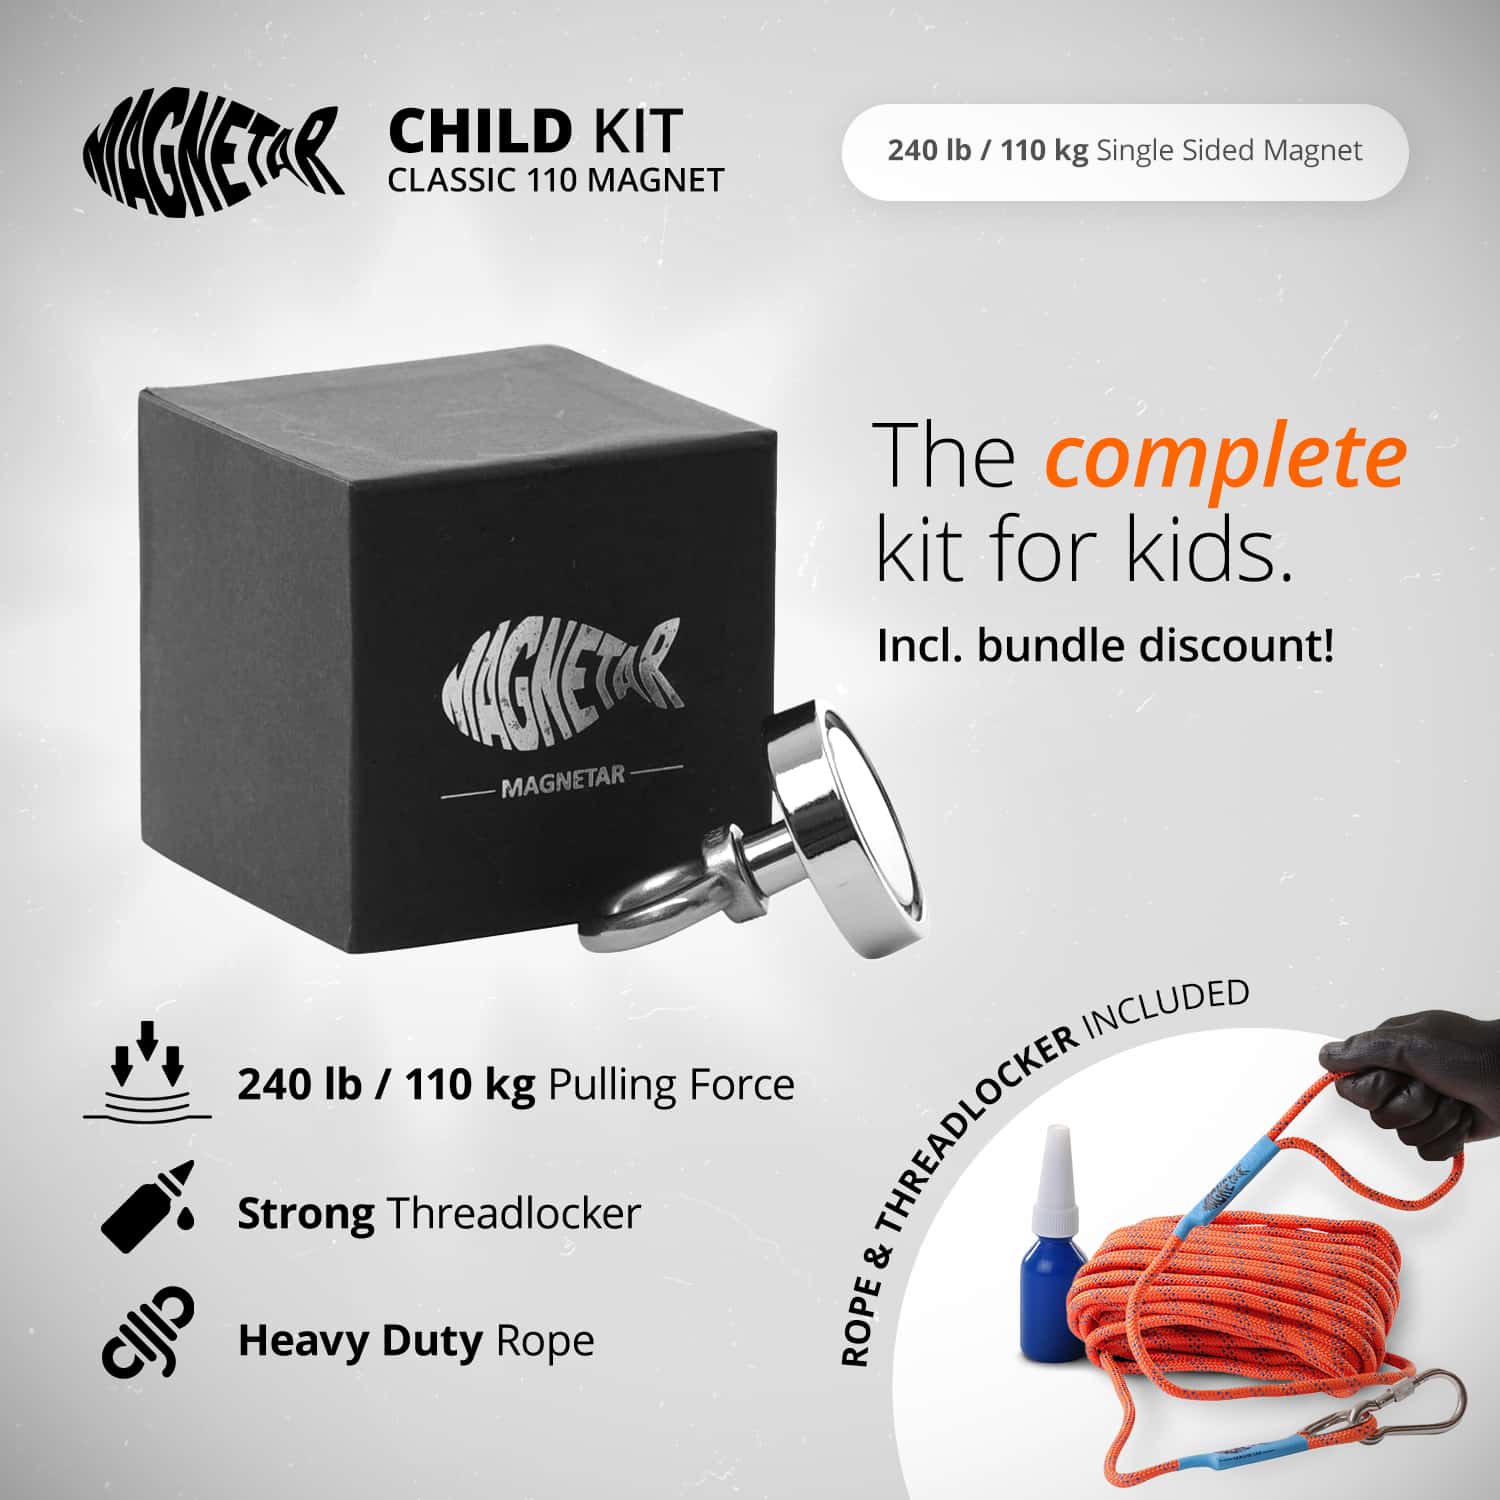 Kids package - 250lb / 110kg - Single sided - Magnet fishing with